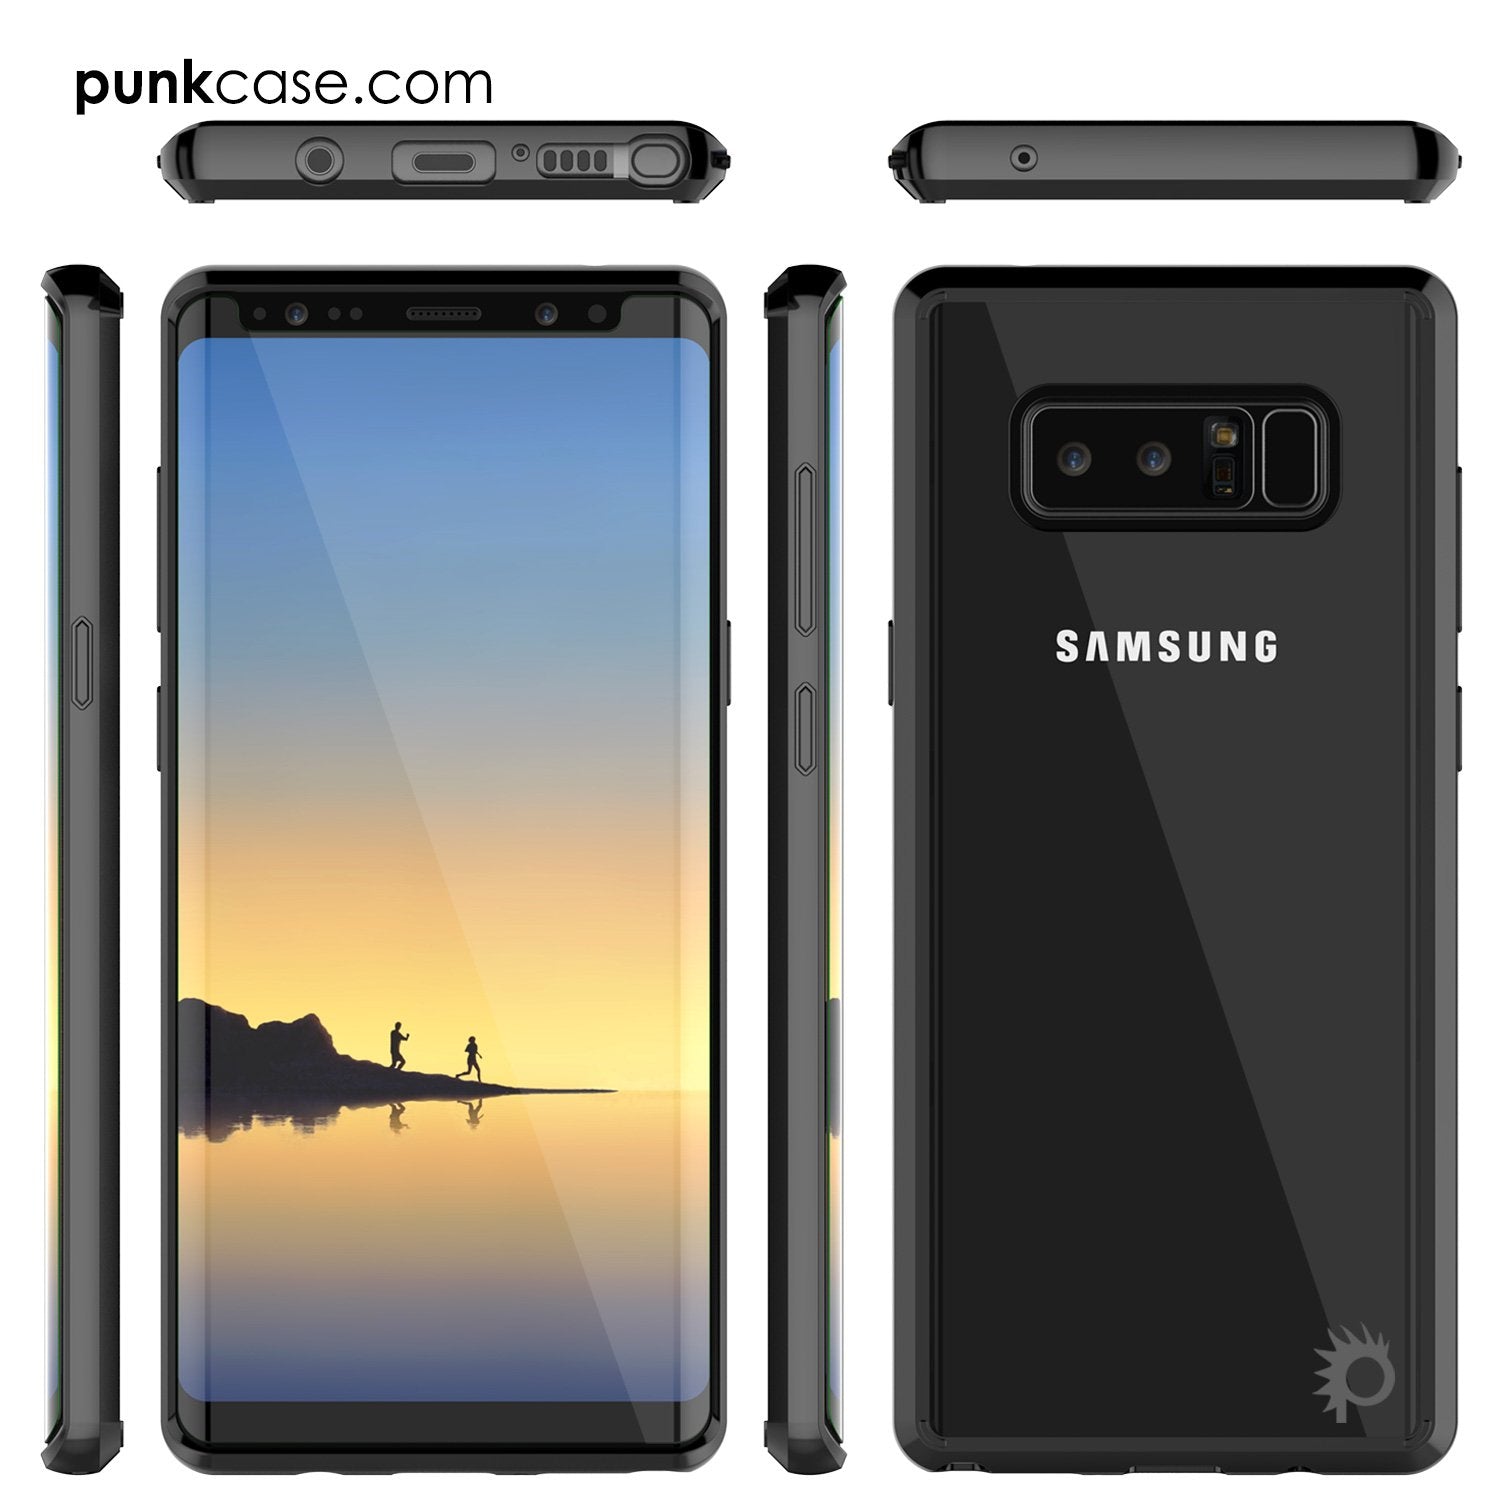 Galaxy Note 8 Case, PunkCase [LUCID 2.0 Series] [Slim Fit] [Clear Back] Armor Cover w/Integrated Anti-Shock System [Black]